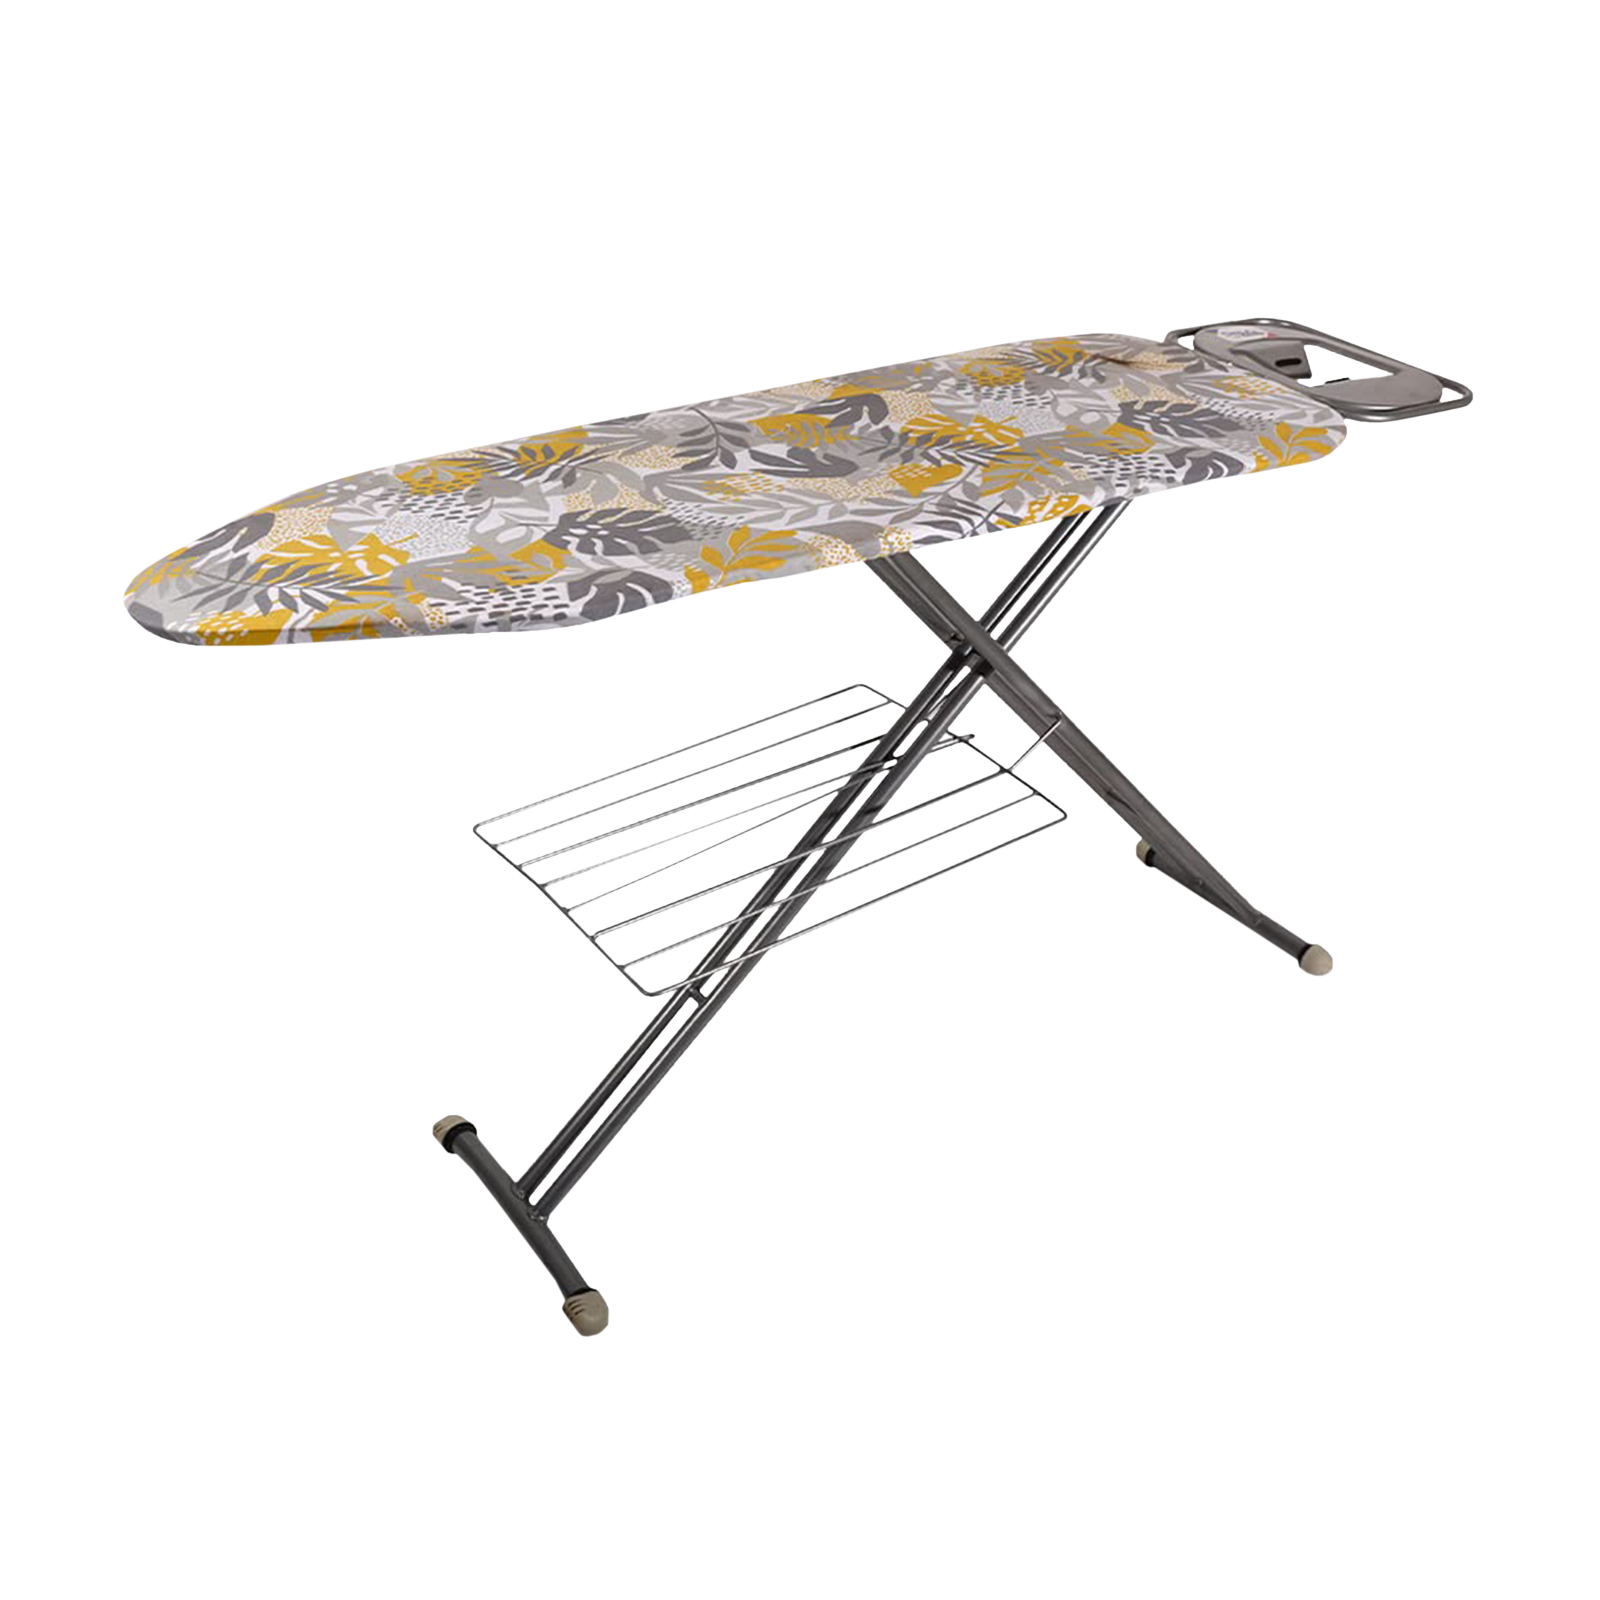 Peng Essentials Ironing Board (Scorch Resistant, Floral_H-Leg_L3, Multicolor)